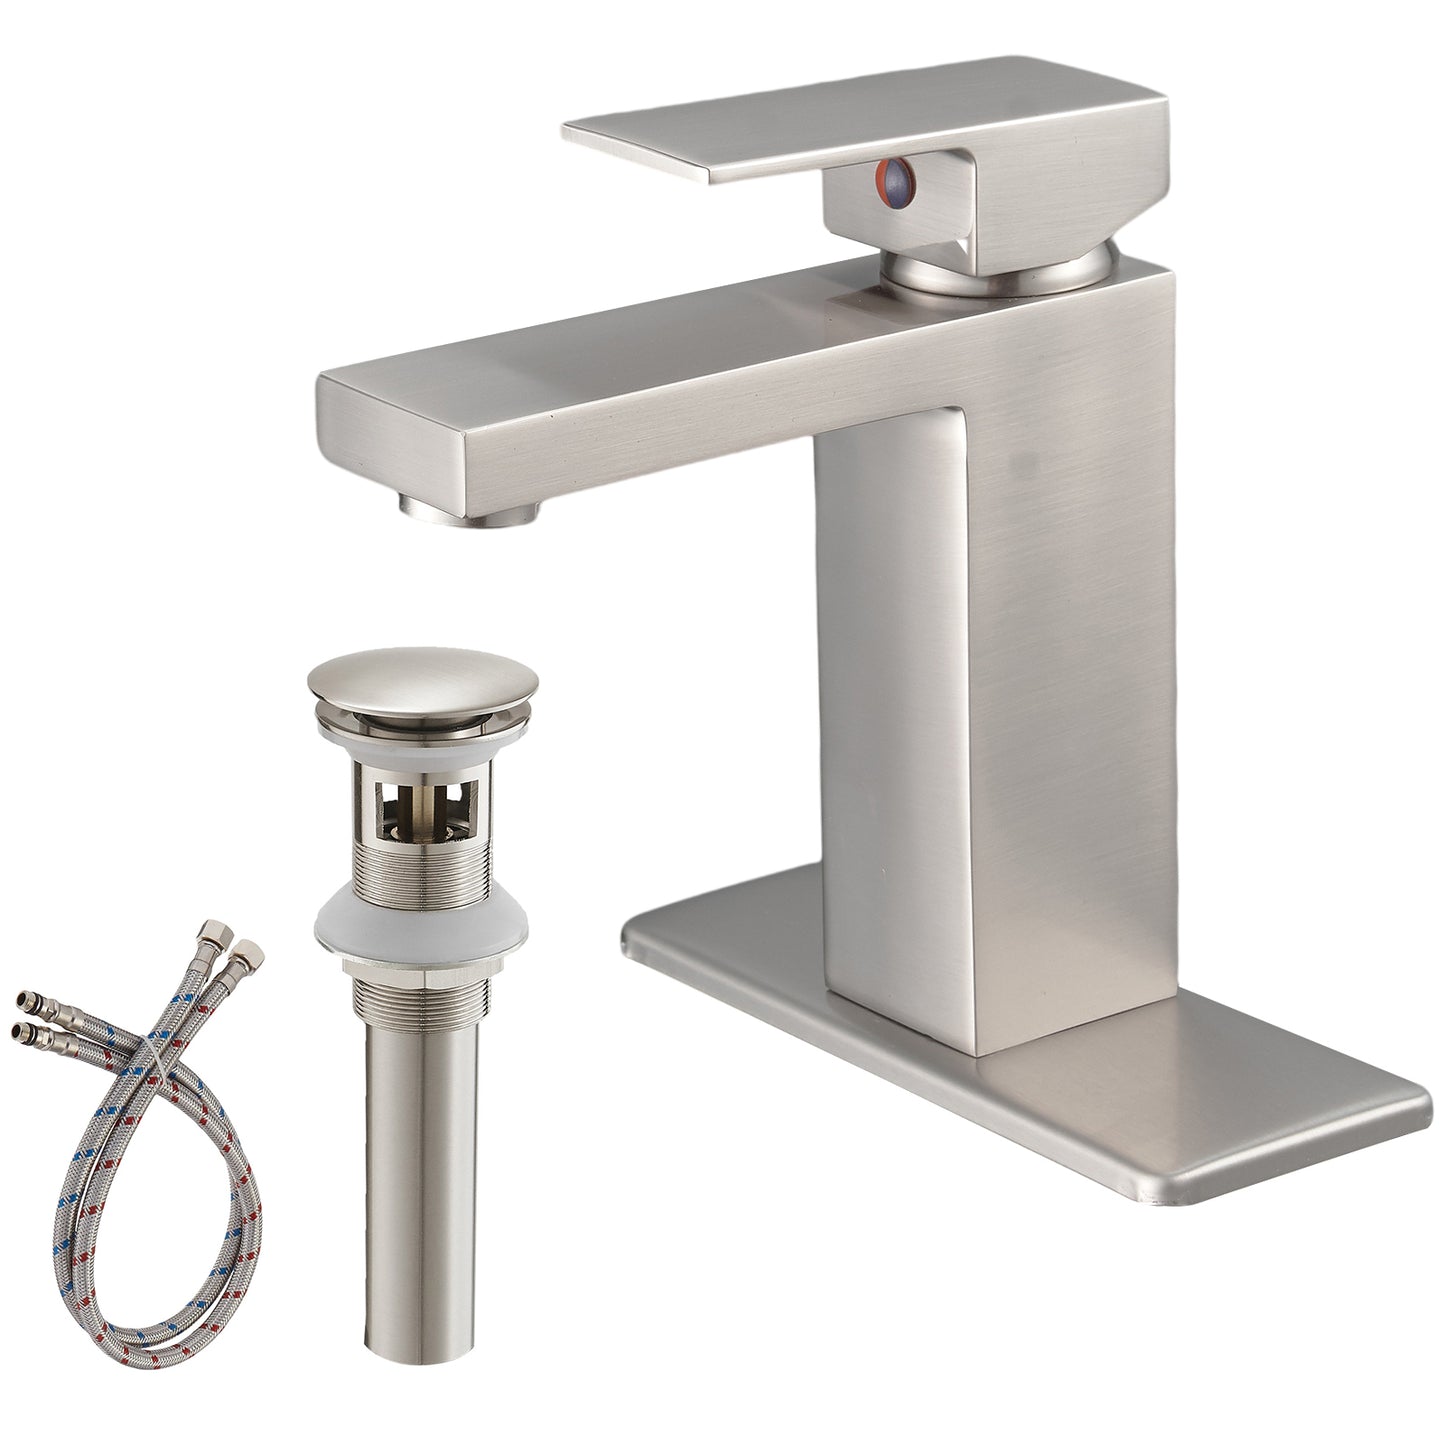 Elegant Brushed Nickel Bathroom Faucet with Single Handle and Pop-up Drain